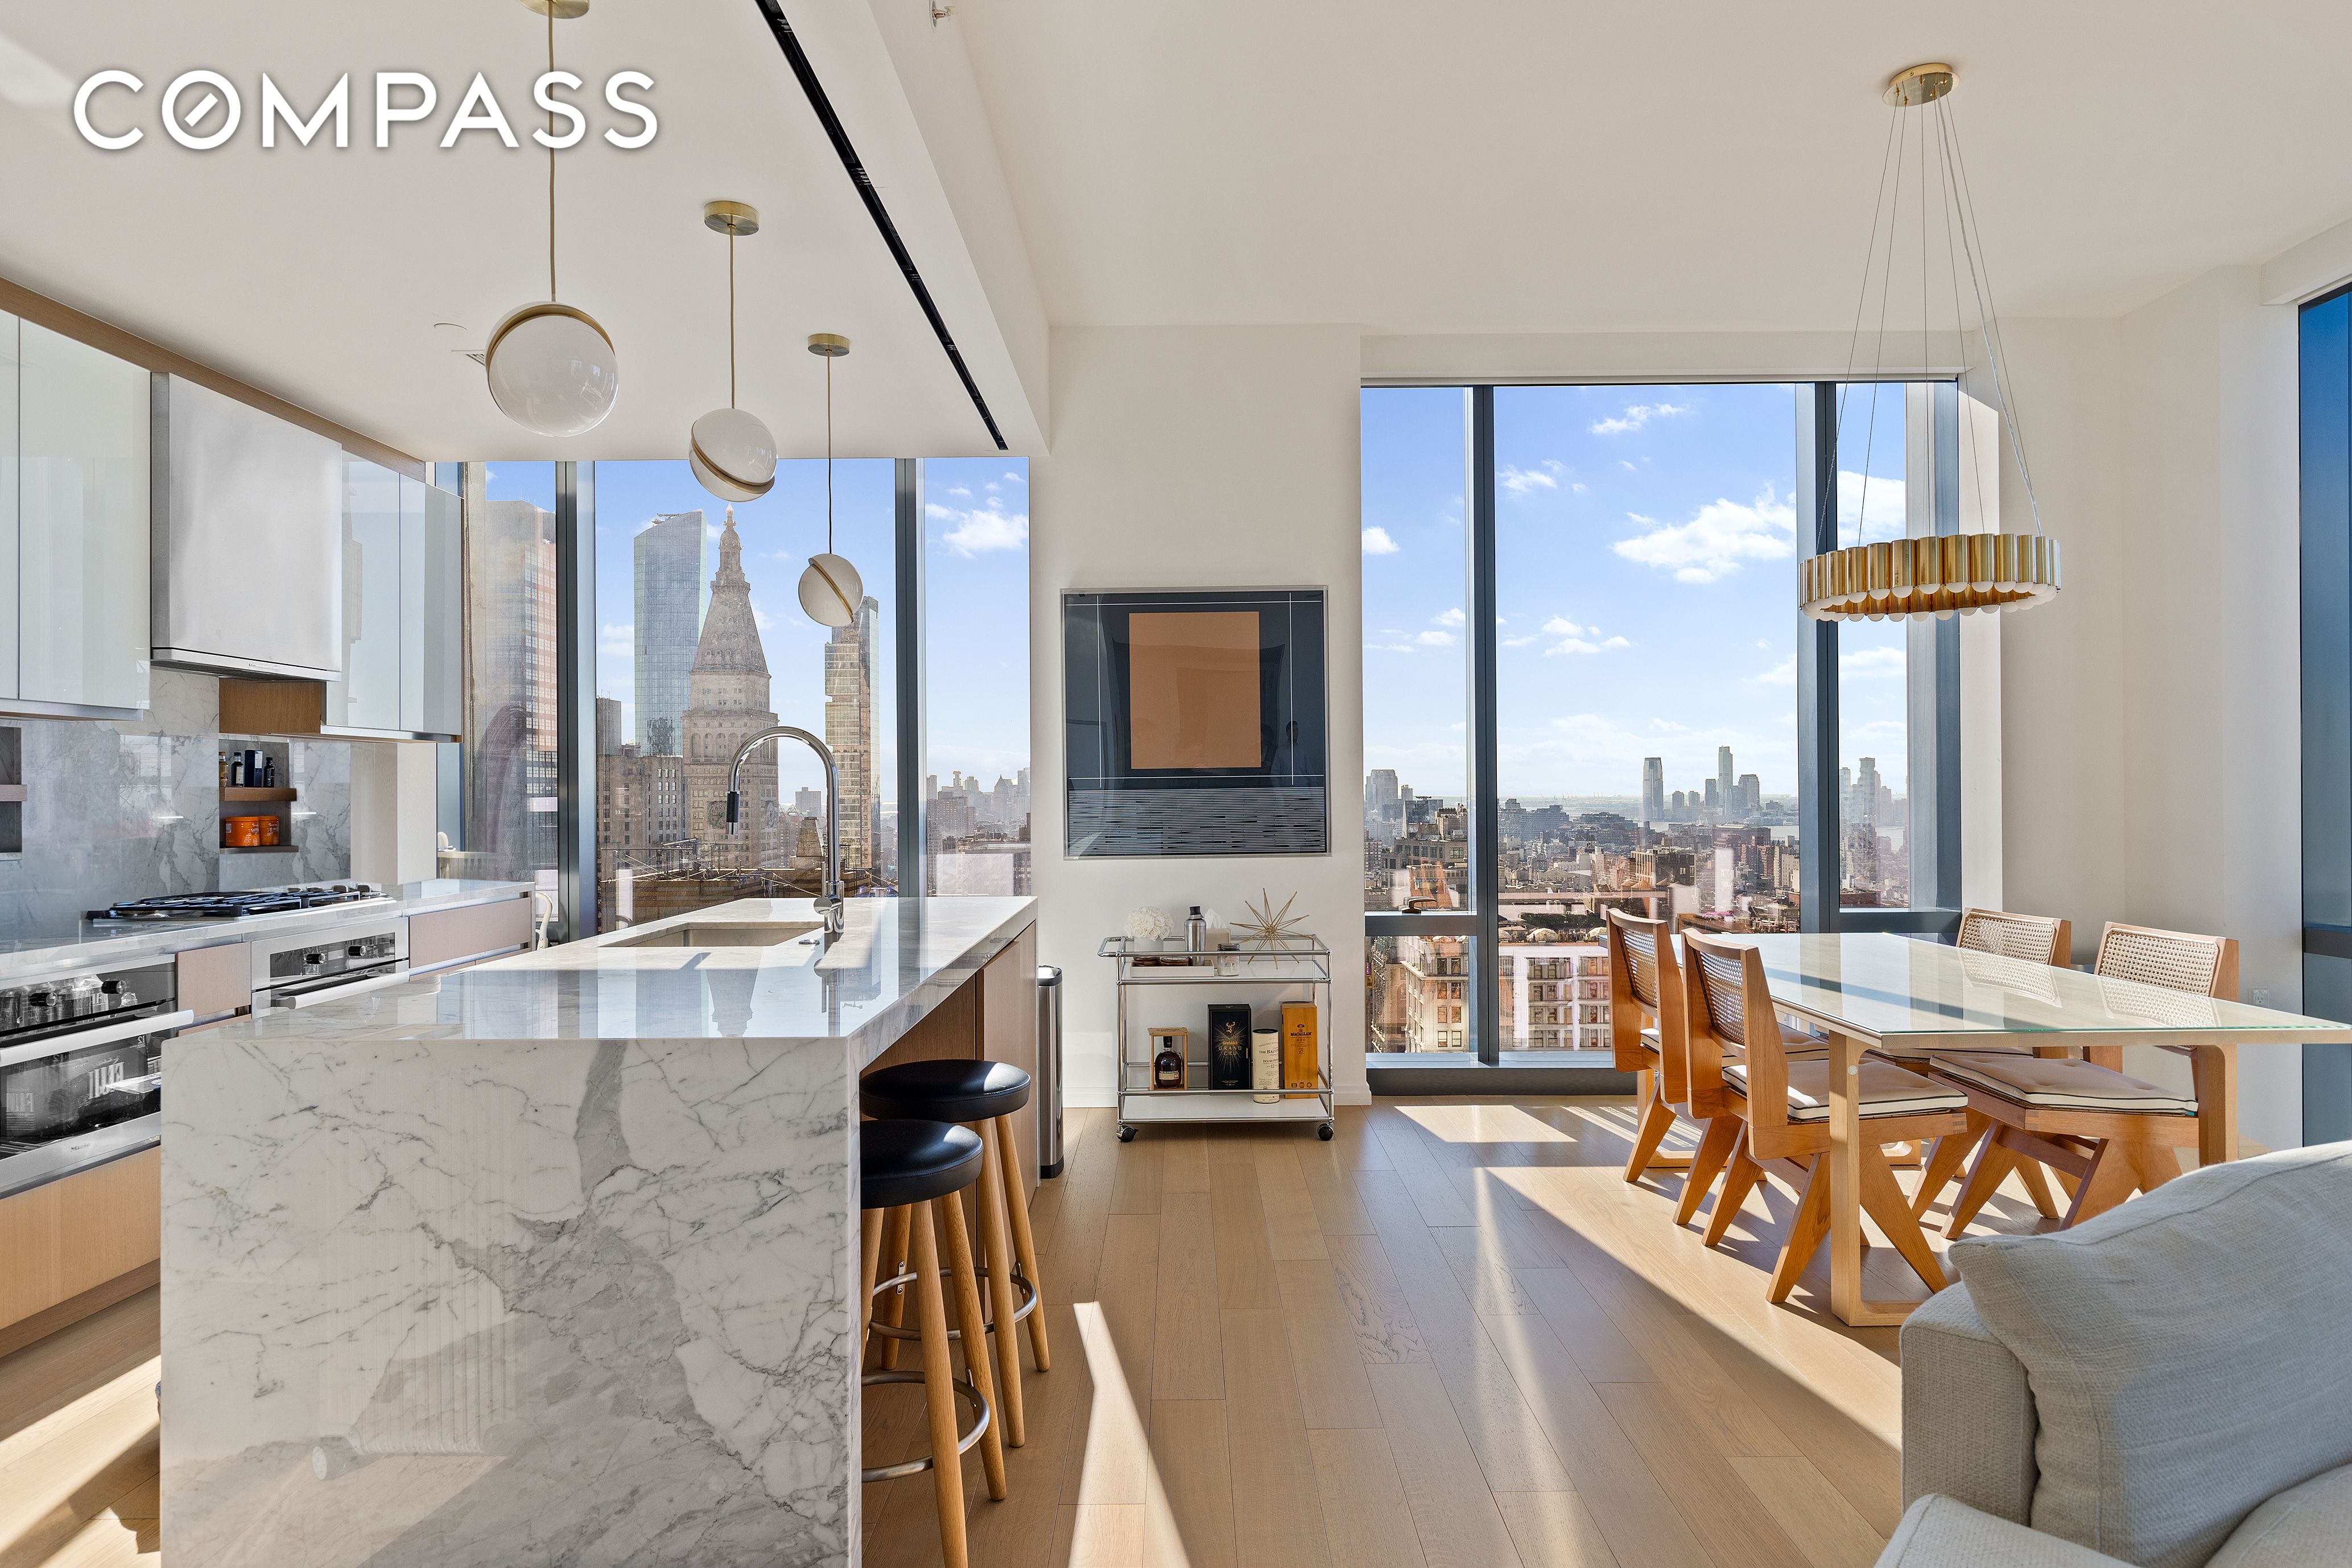 277 5th Avenue 34C, Nomad, Downtown, NYC - 2 Bedrooms  
2 Bathrooms  
5 Rooms - 